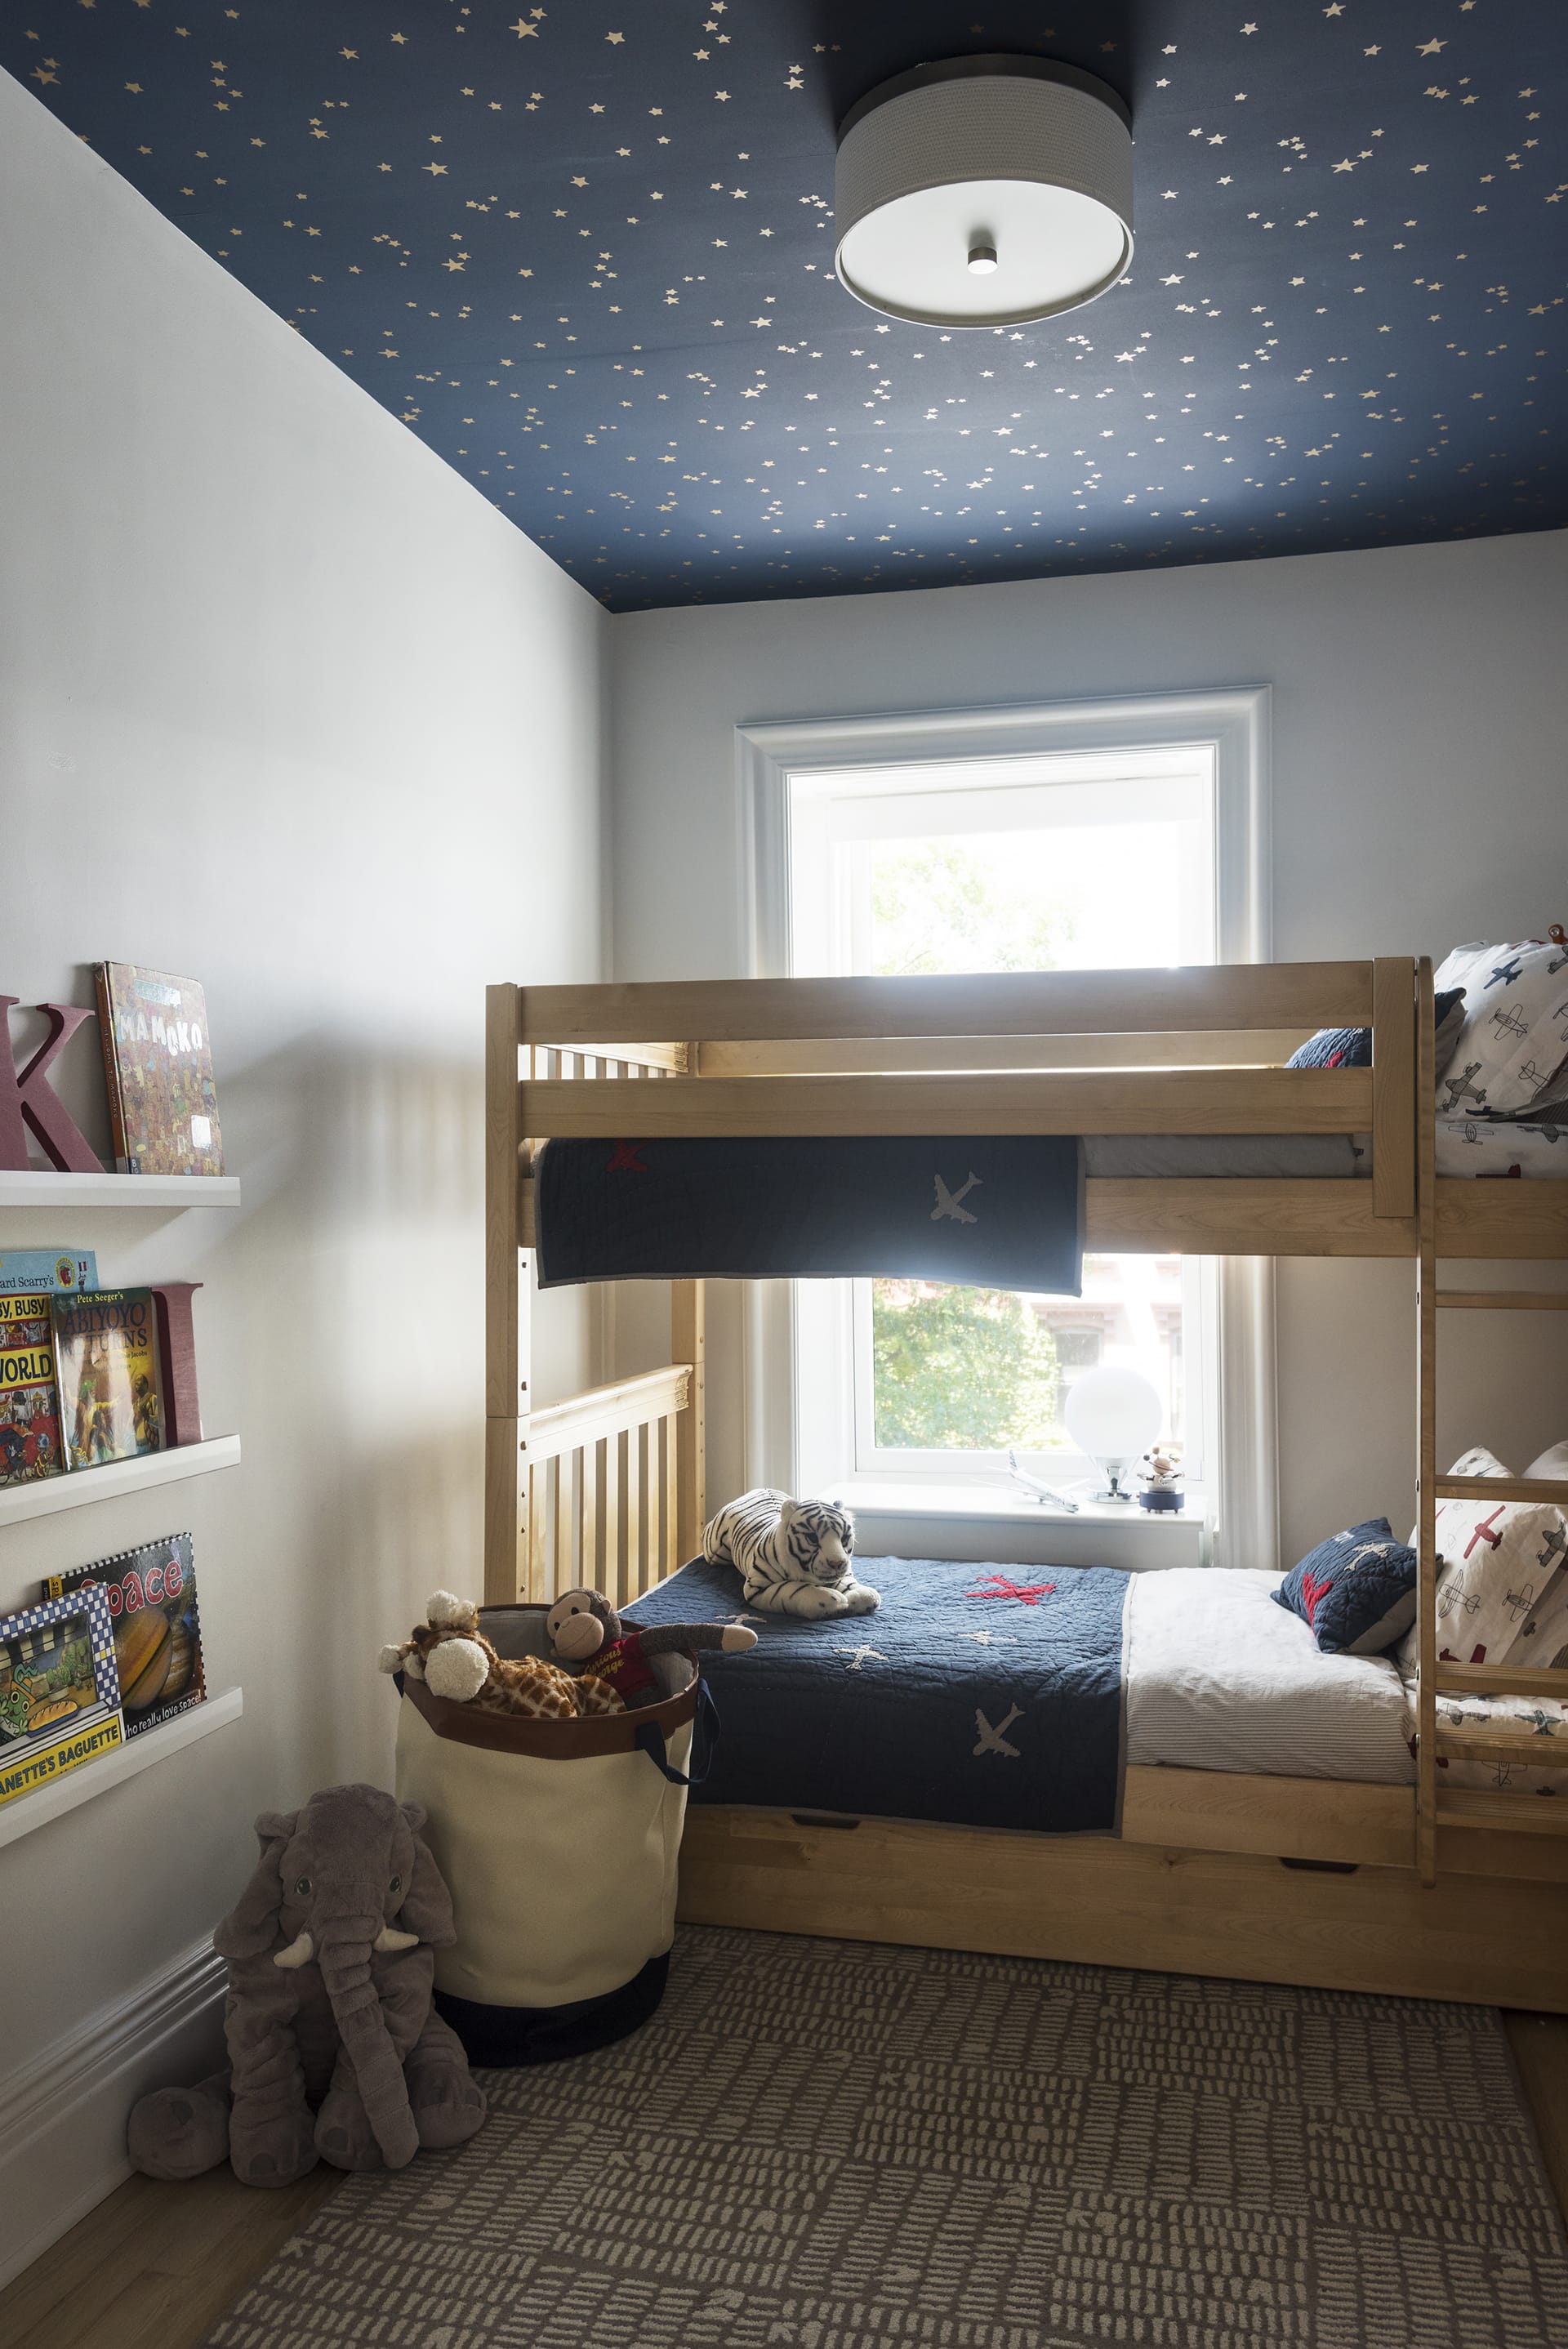 Children's room with bunk beds and a night sky mural on the ceiling